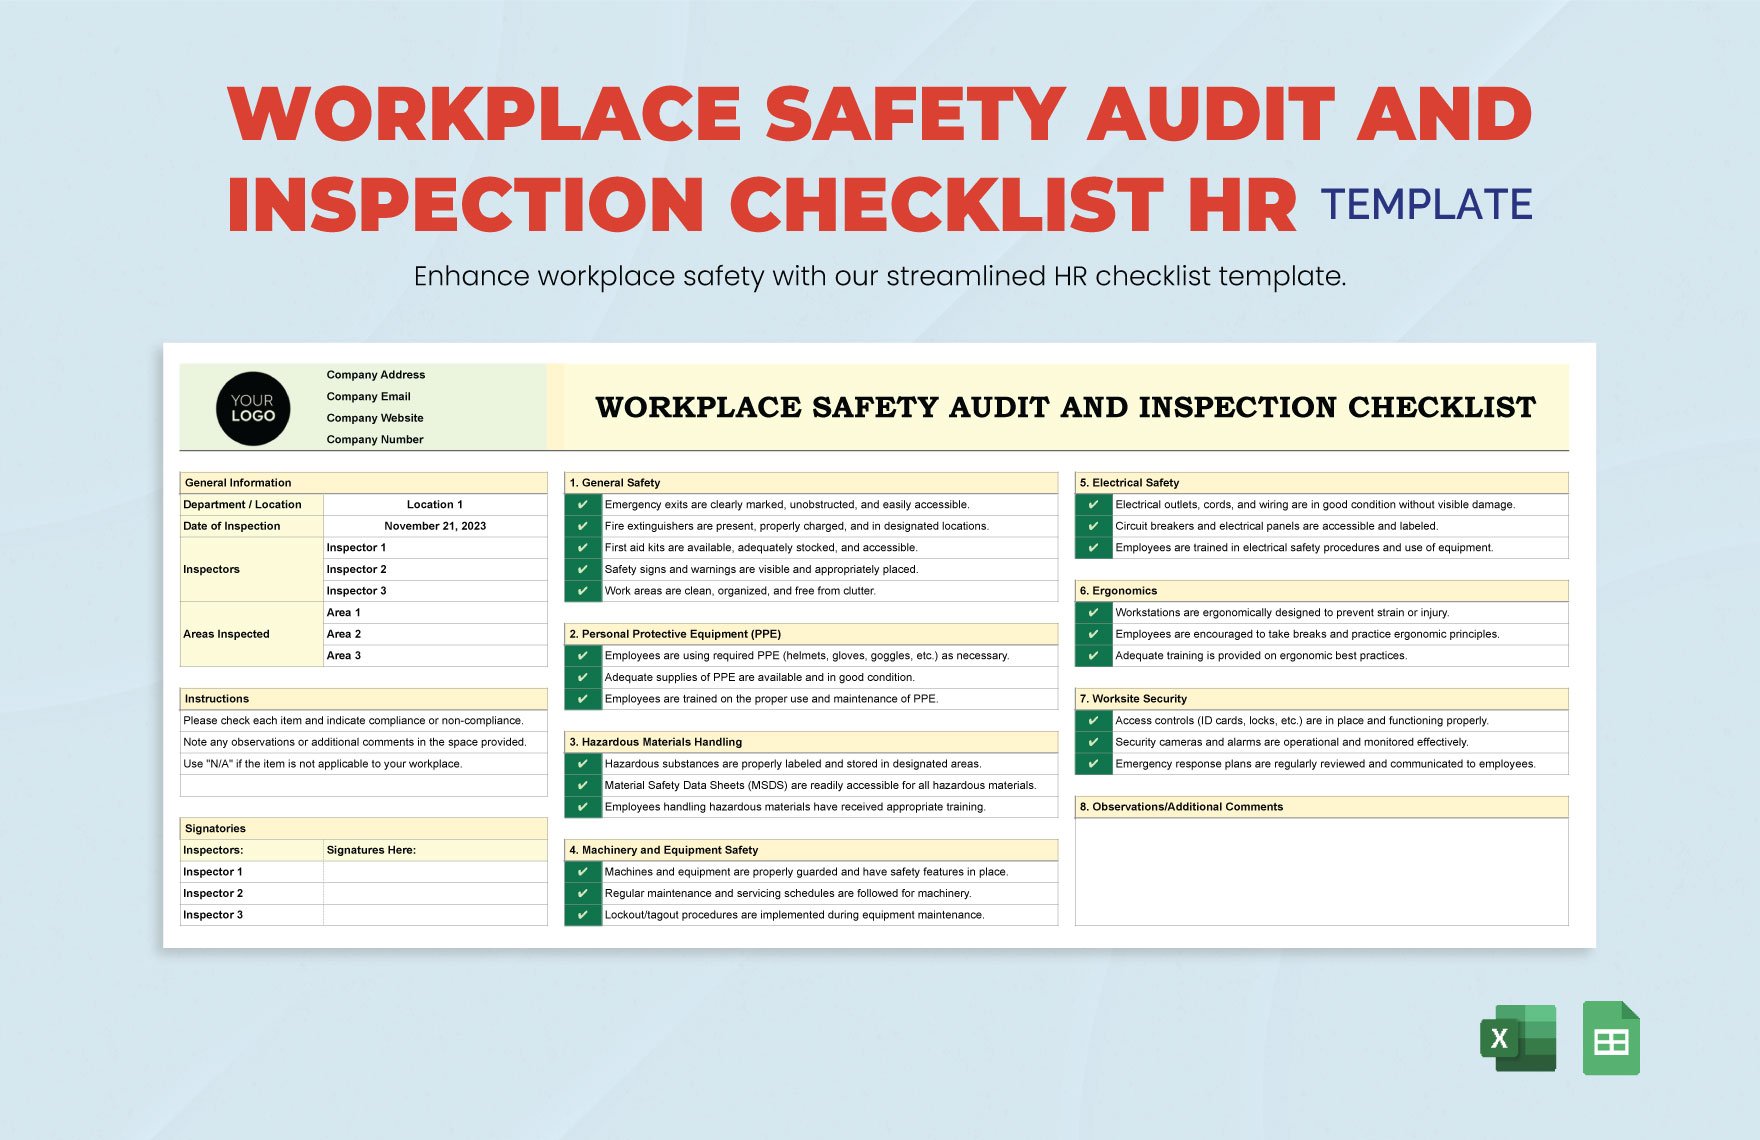 Workplace Safety Audit and Inspection Checklist HR Template in Excel, Google Sheets